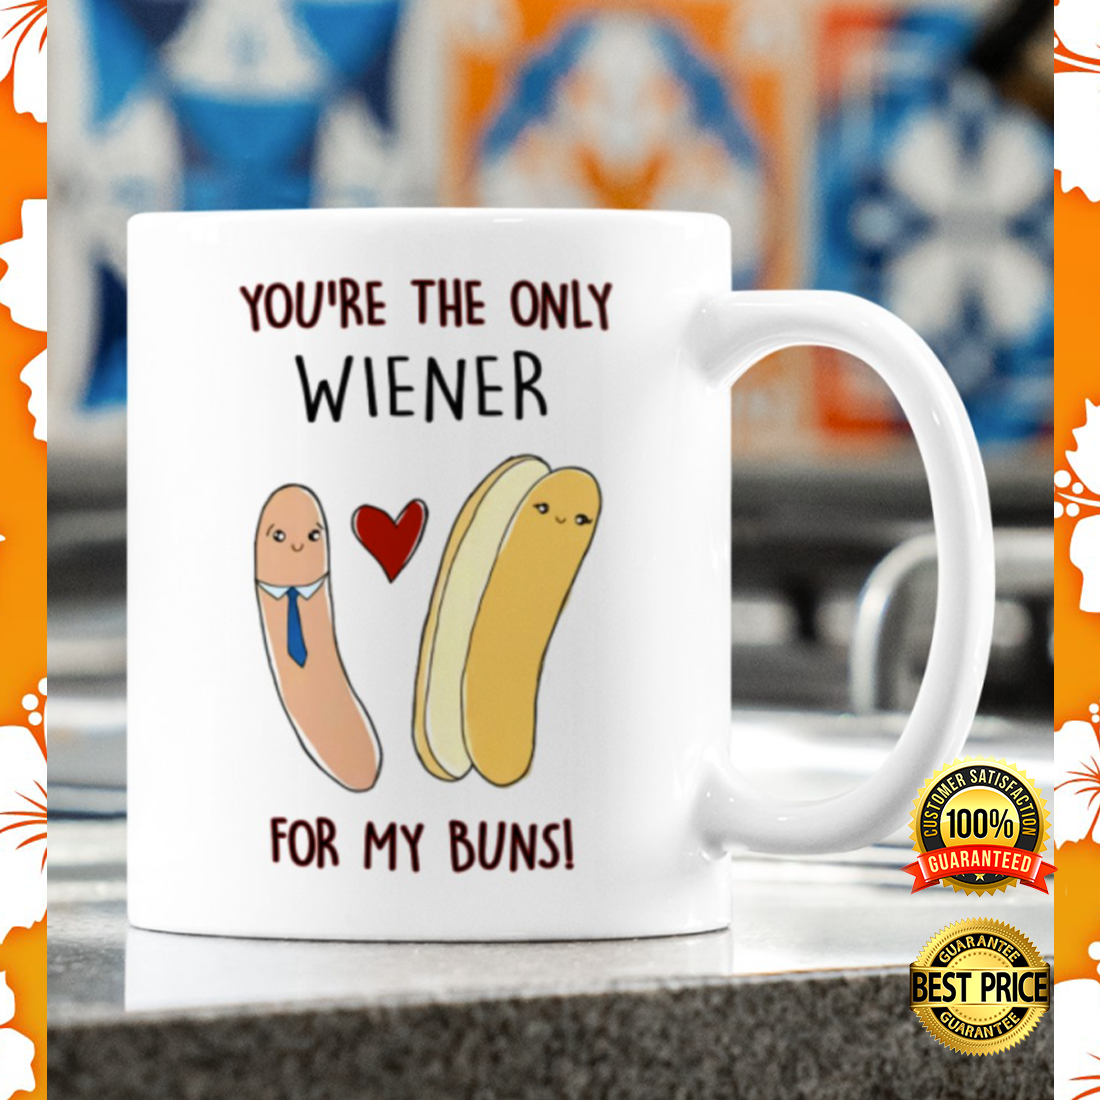 You_re the only wiener for my buns mug 2